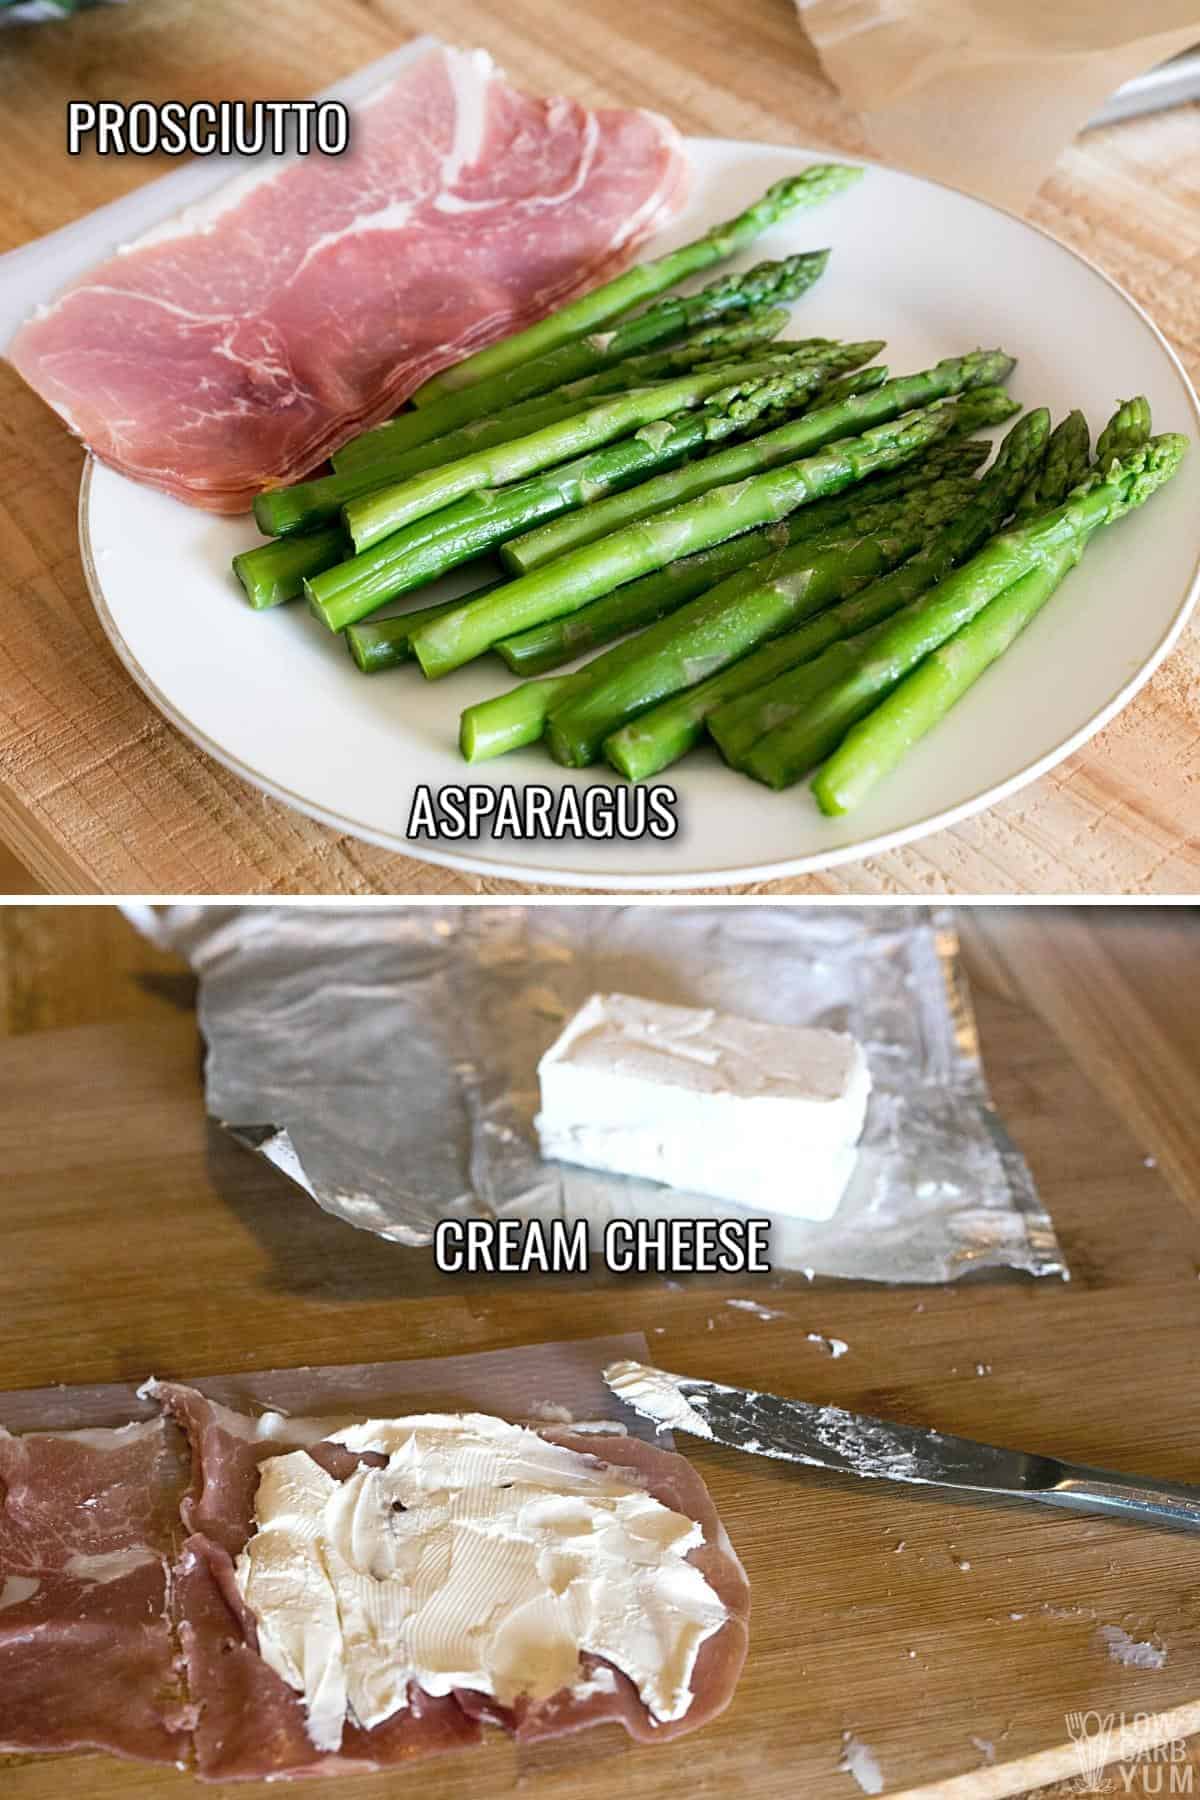 ingredients for prosciutto wrapped asparagus recipe.